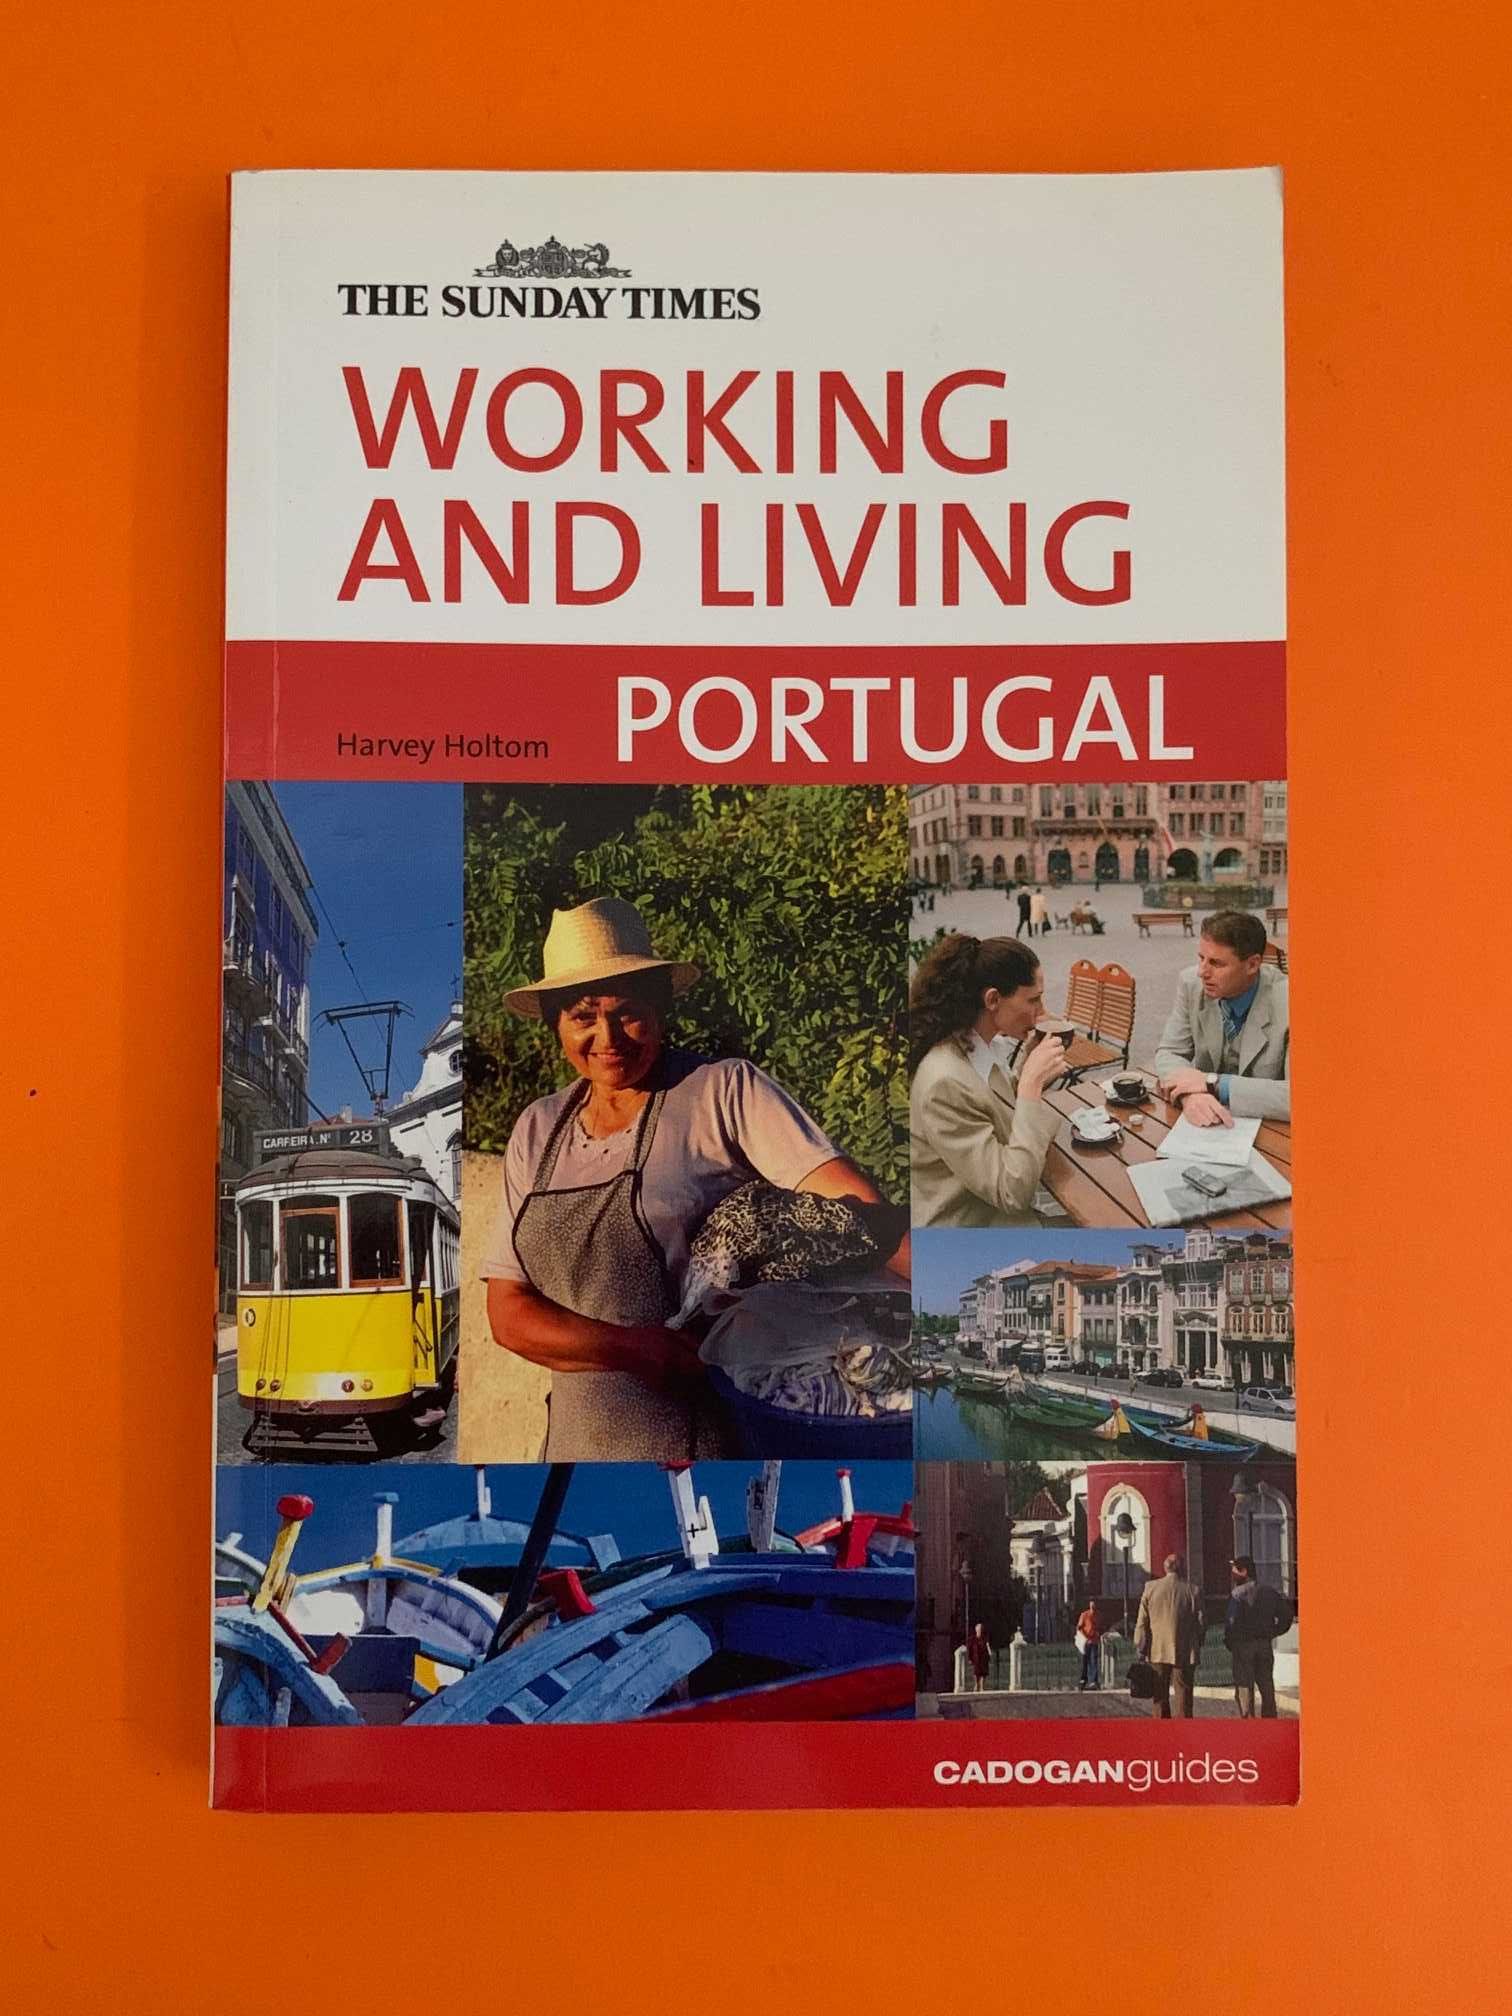 Working and living Portugal - Harvey Holtom